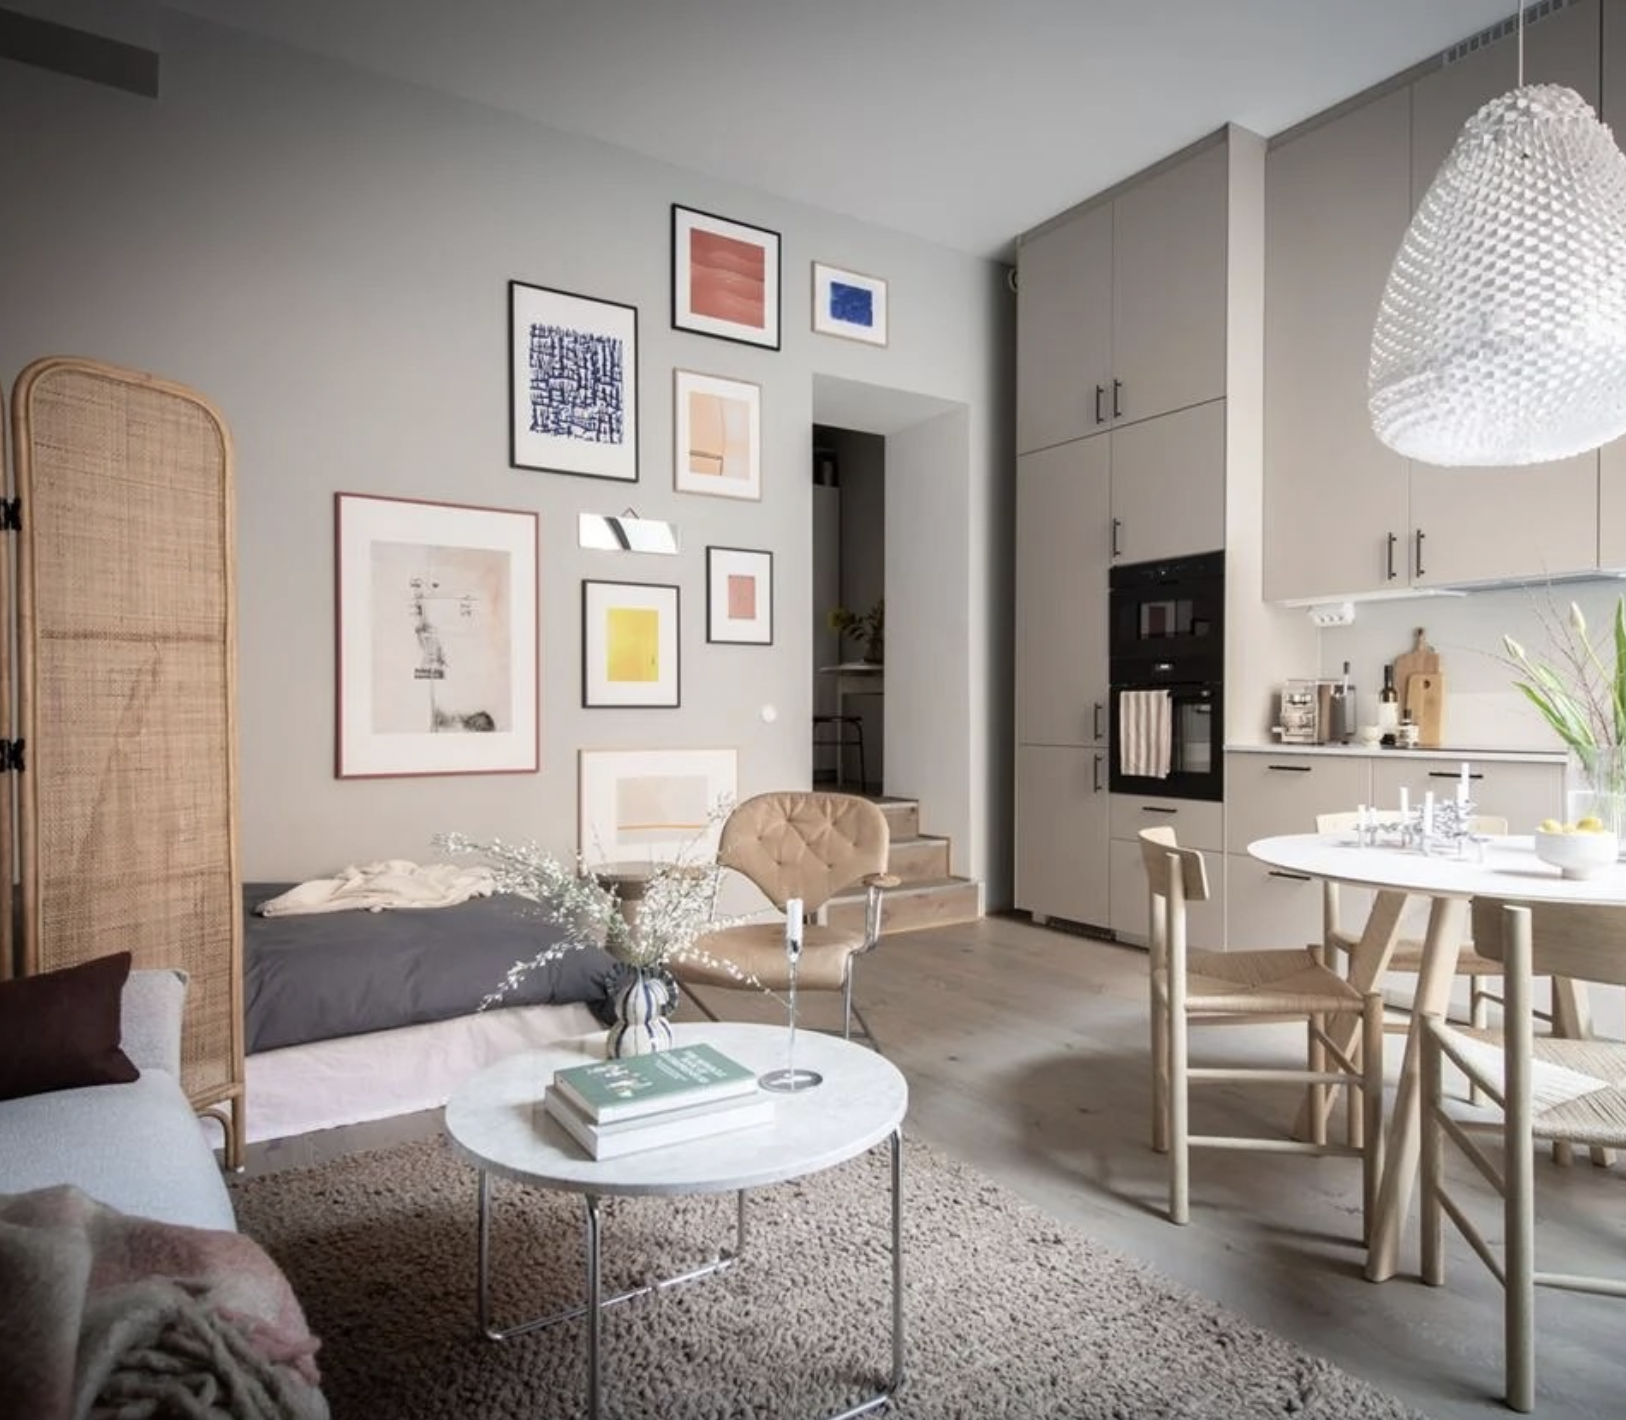 A Studio Apartment With High Ceilings And a Tall Beige Kitchen